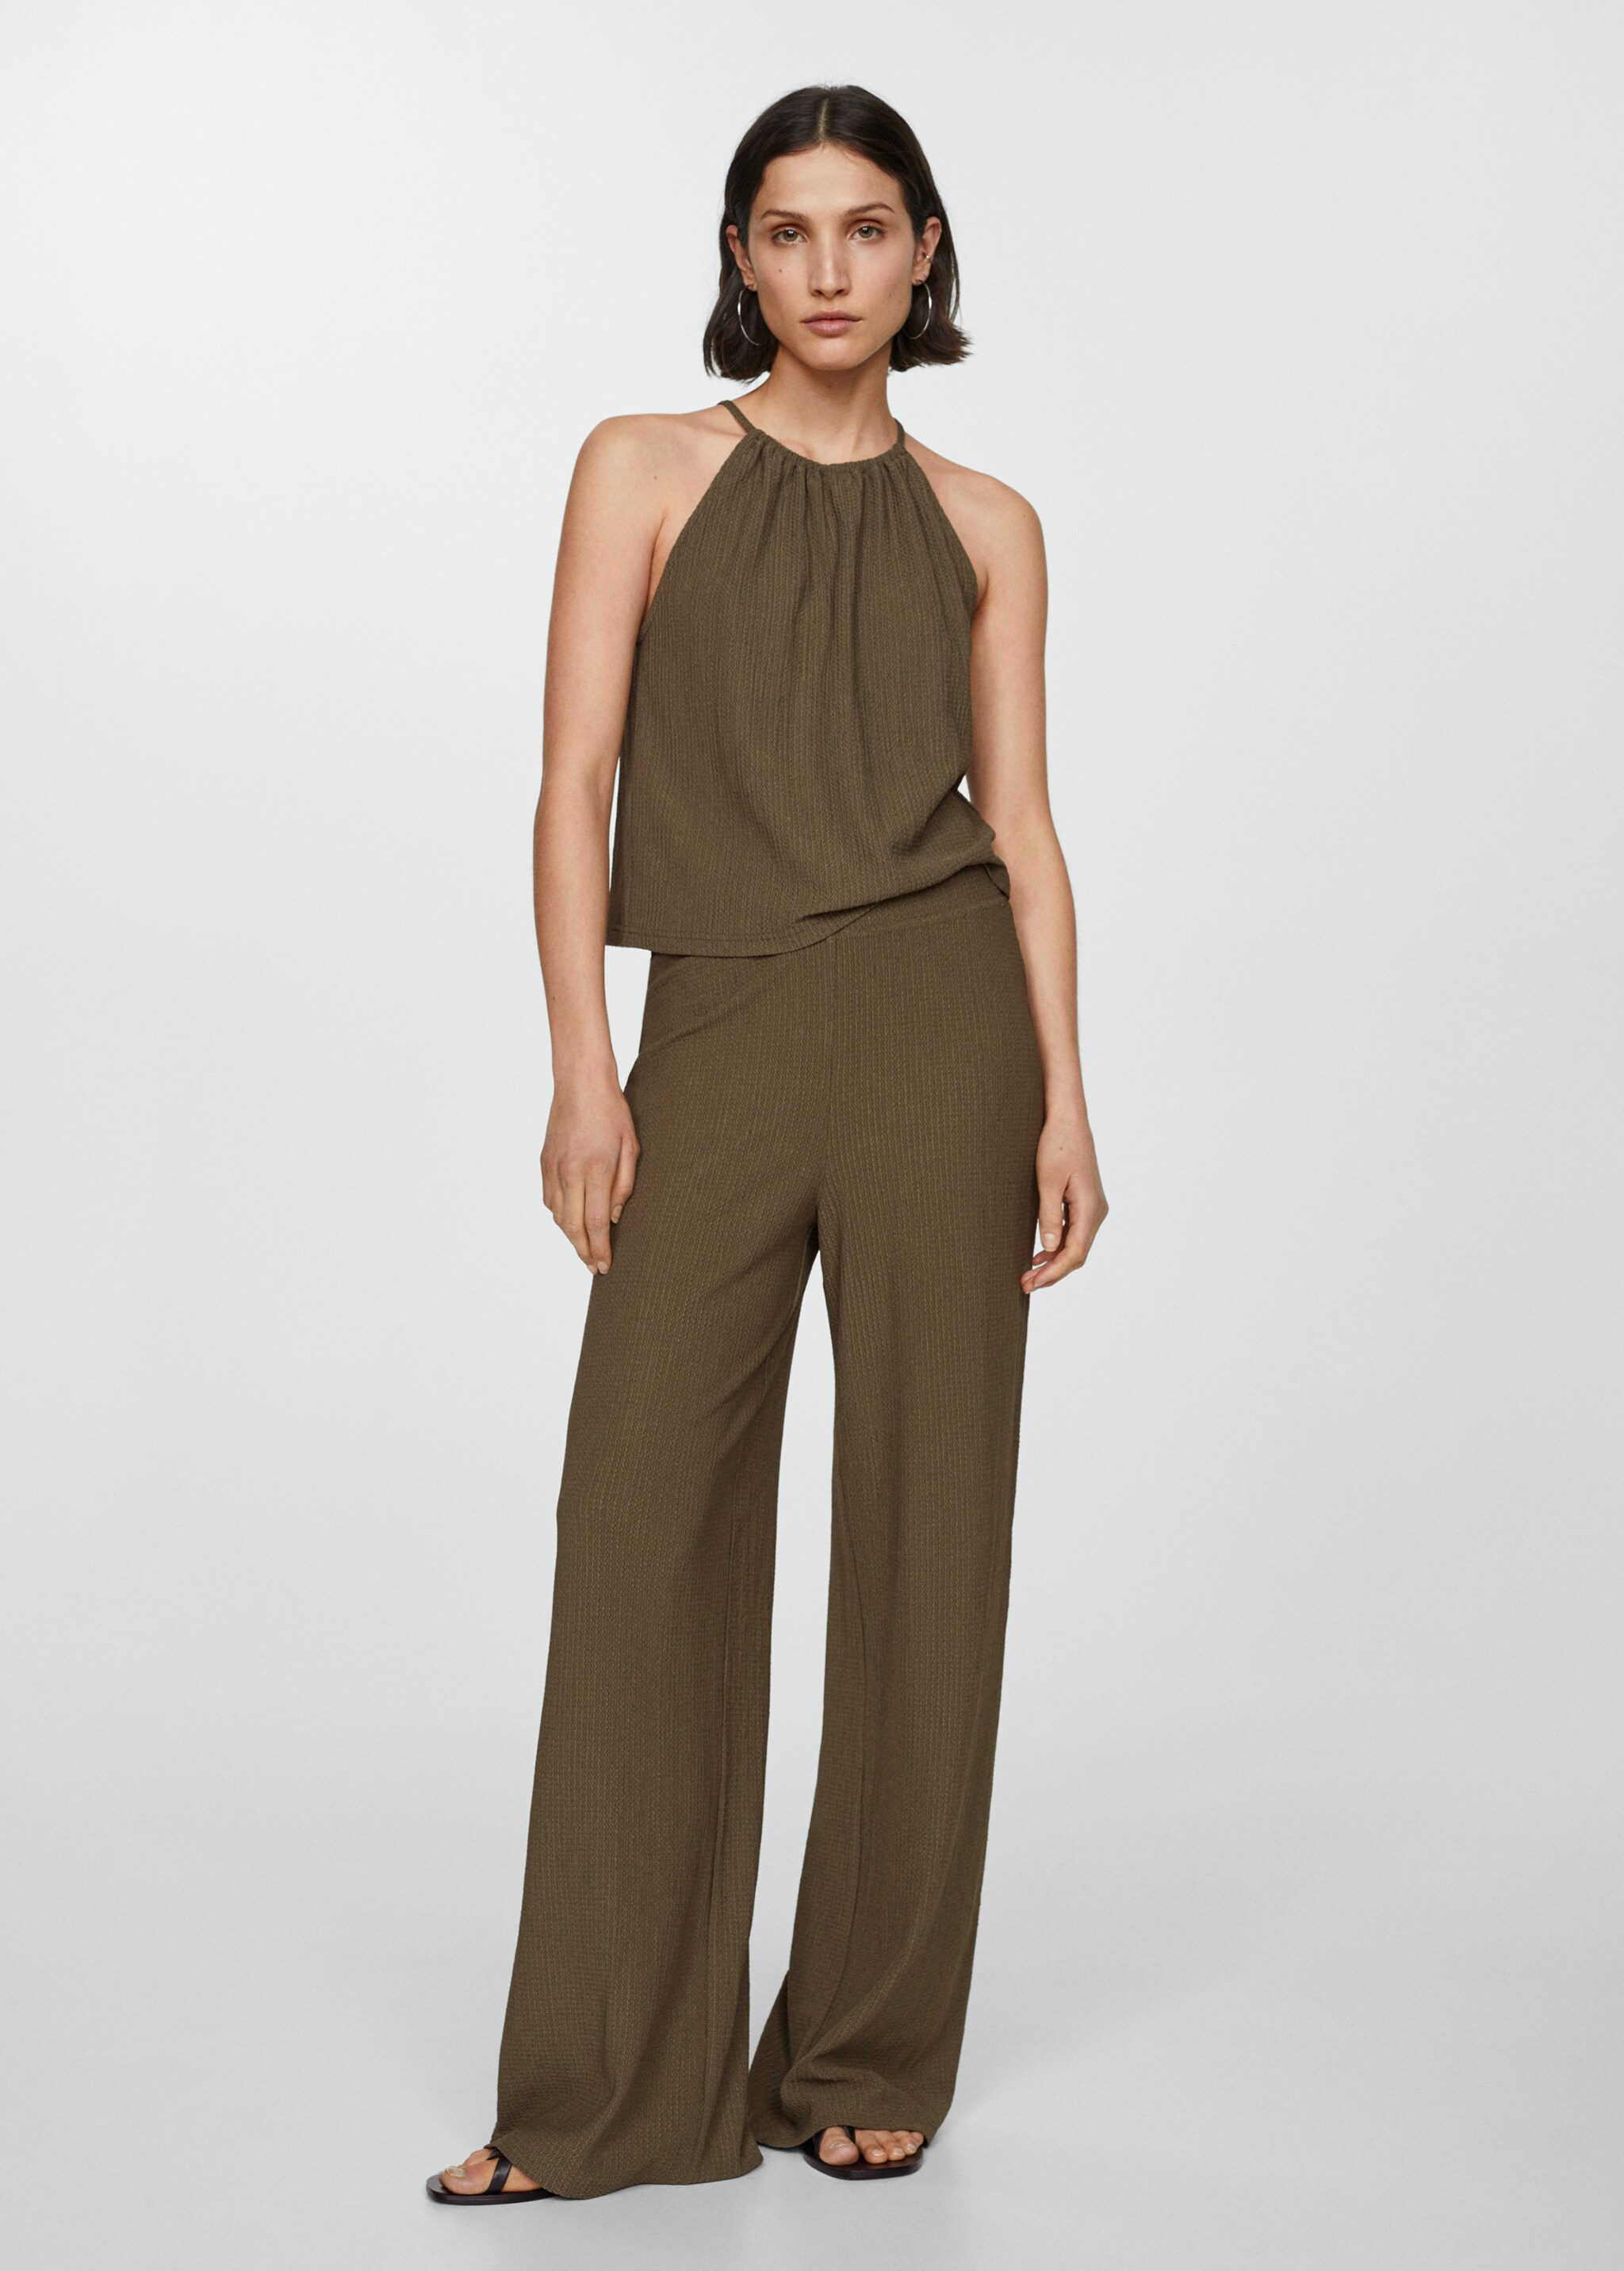 Ruched-texture top - General plane